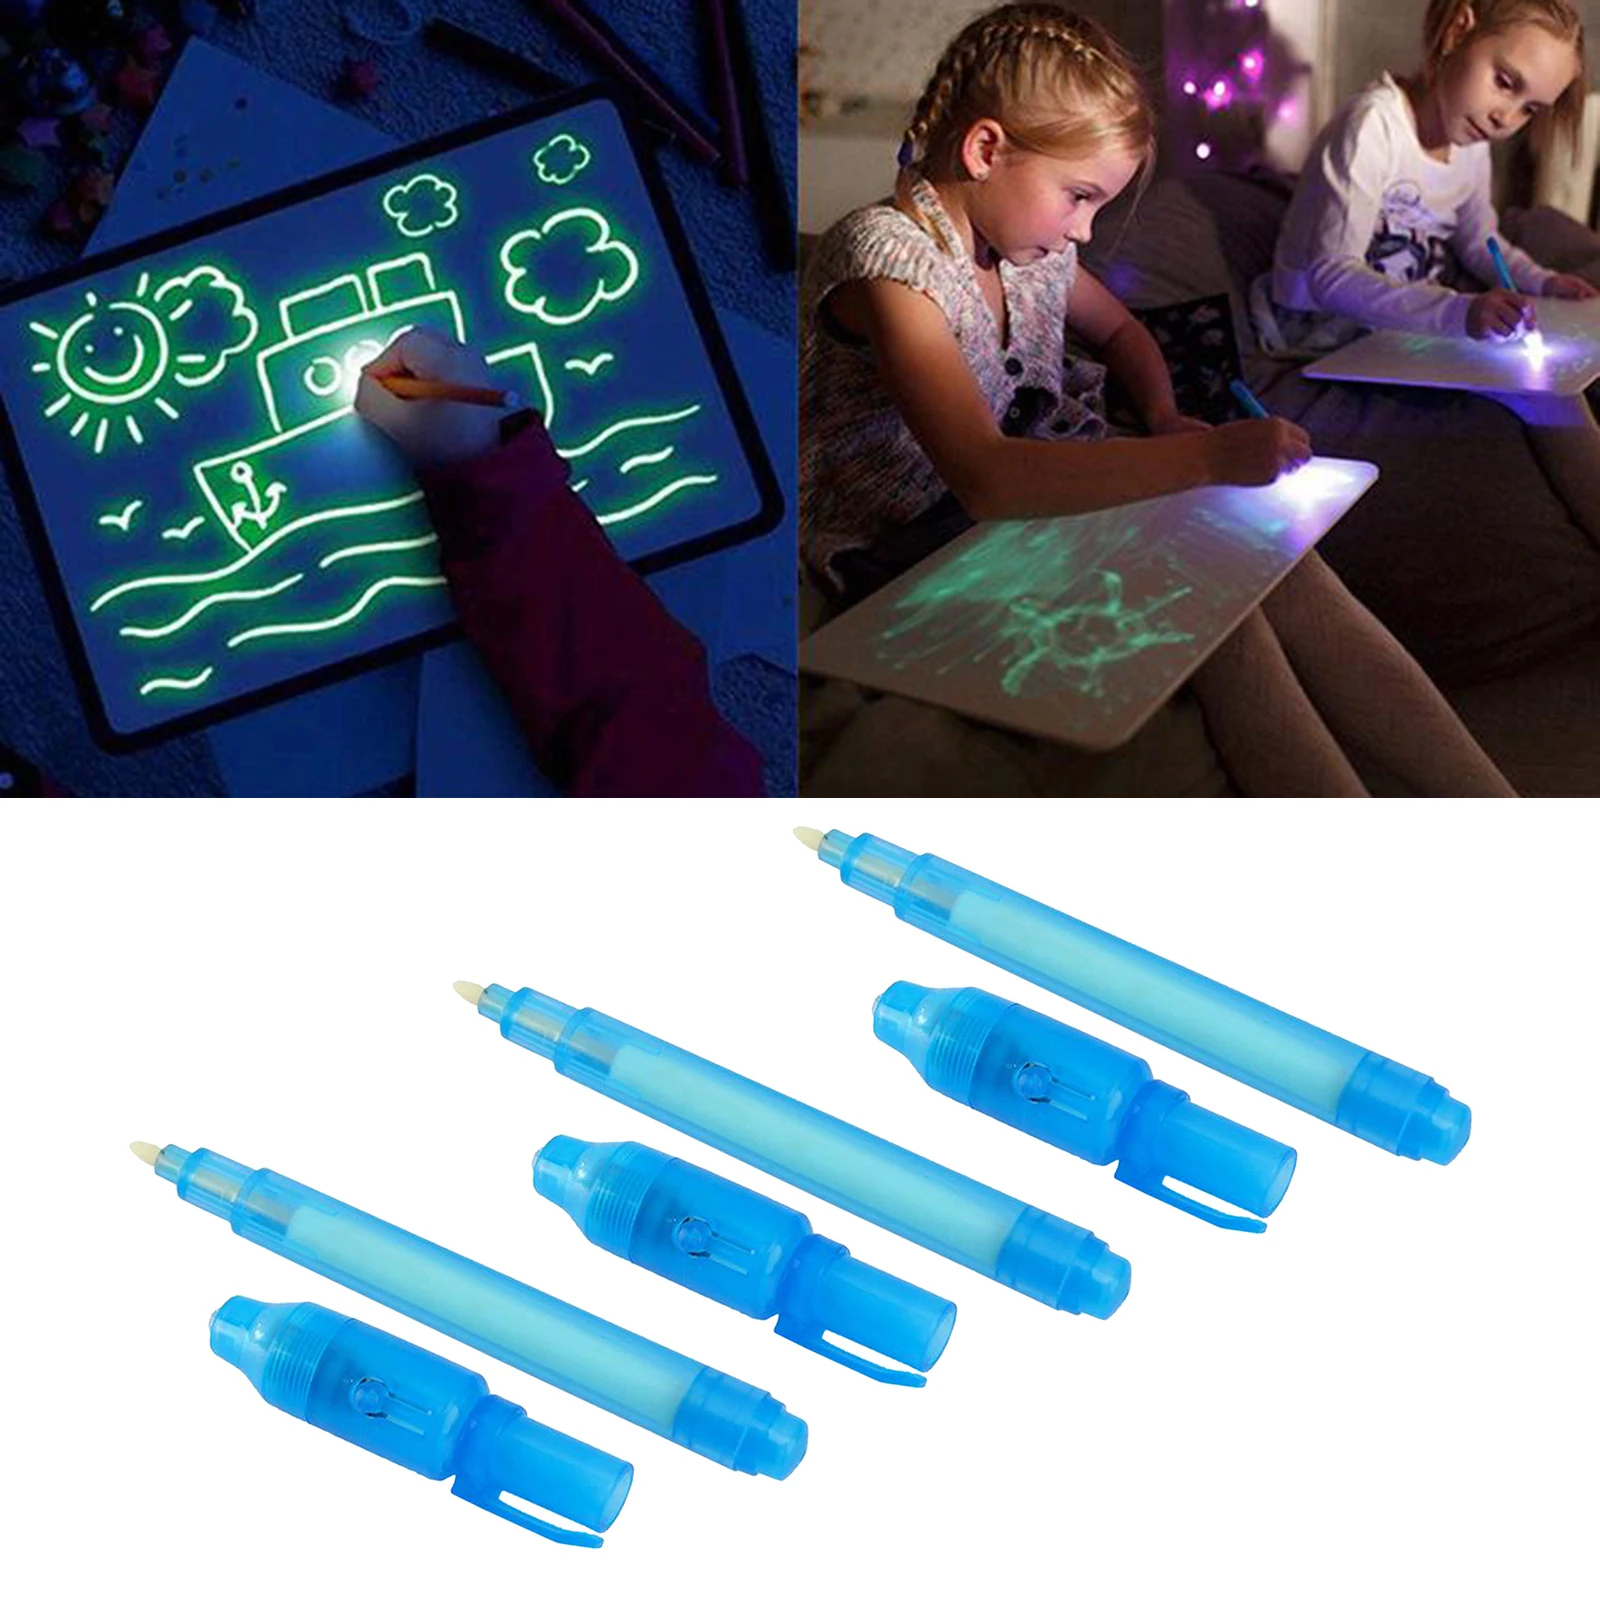 3Pcs Invisible Ink Pen with UV Black Light   Marker Pens for Writing